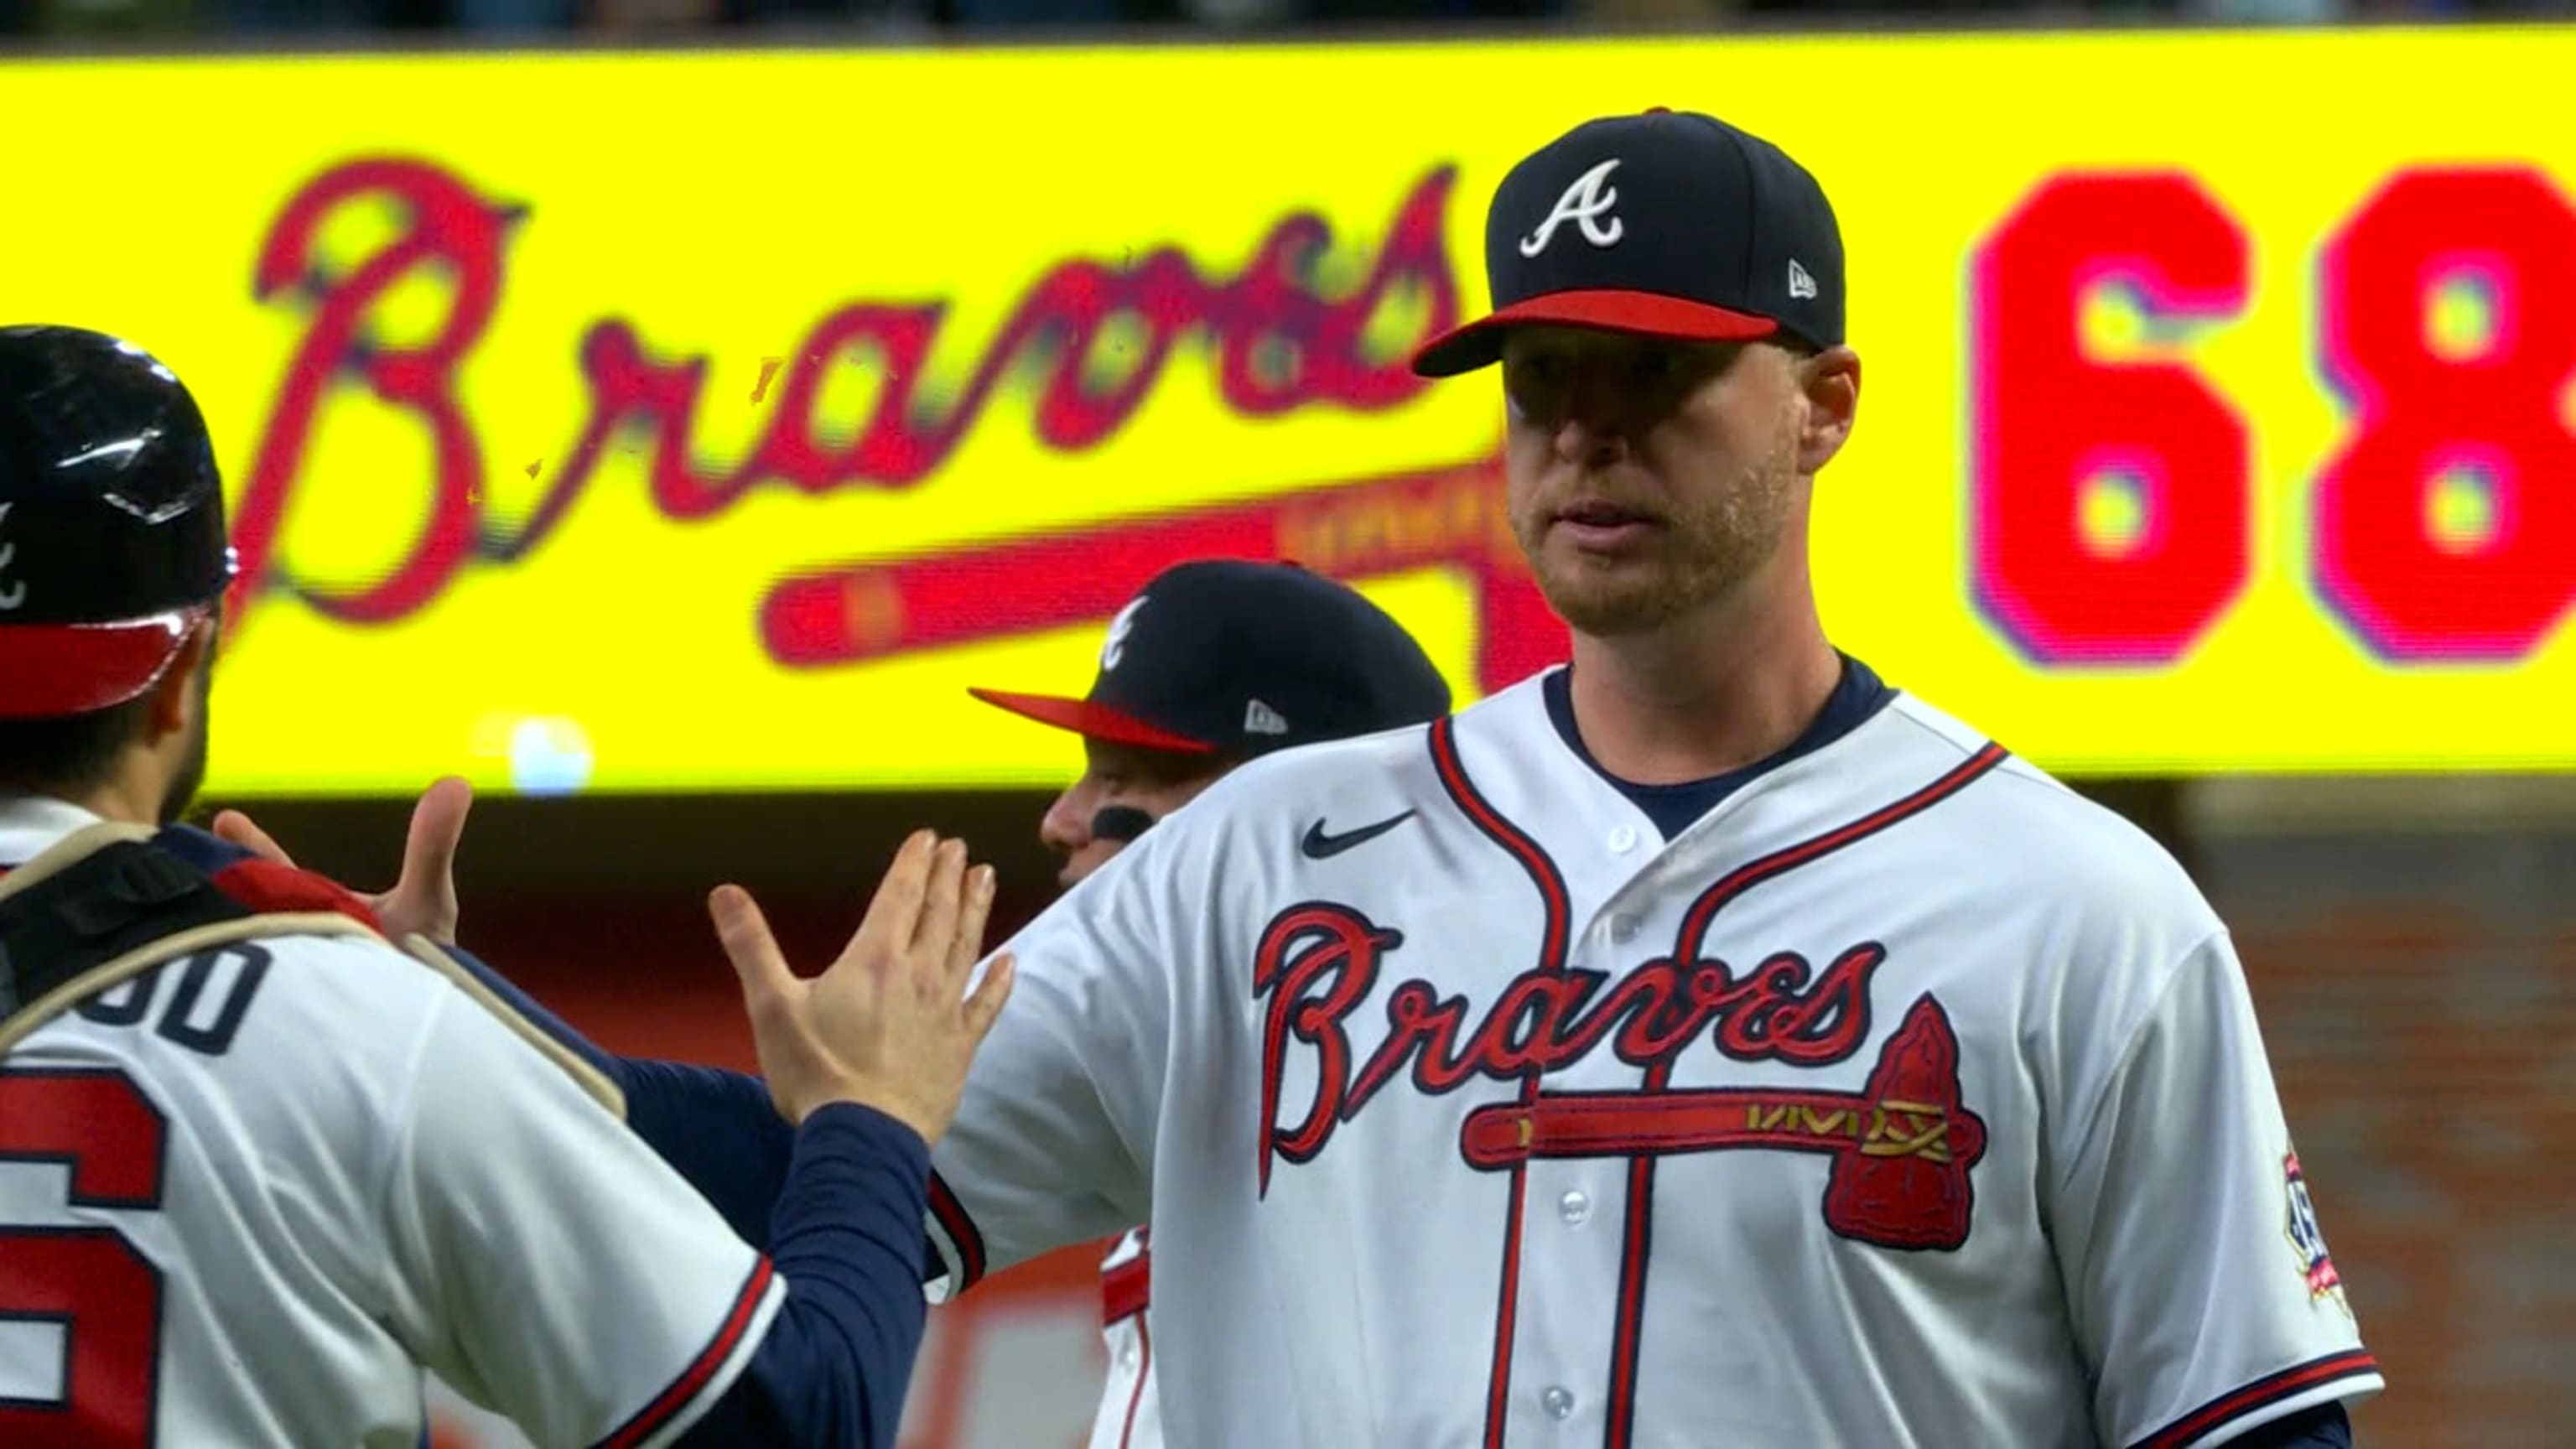 World Series game 4: Braves are just one win away from victory